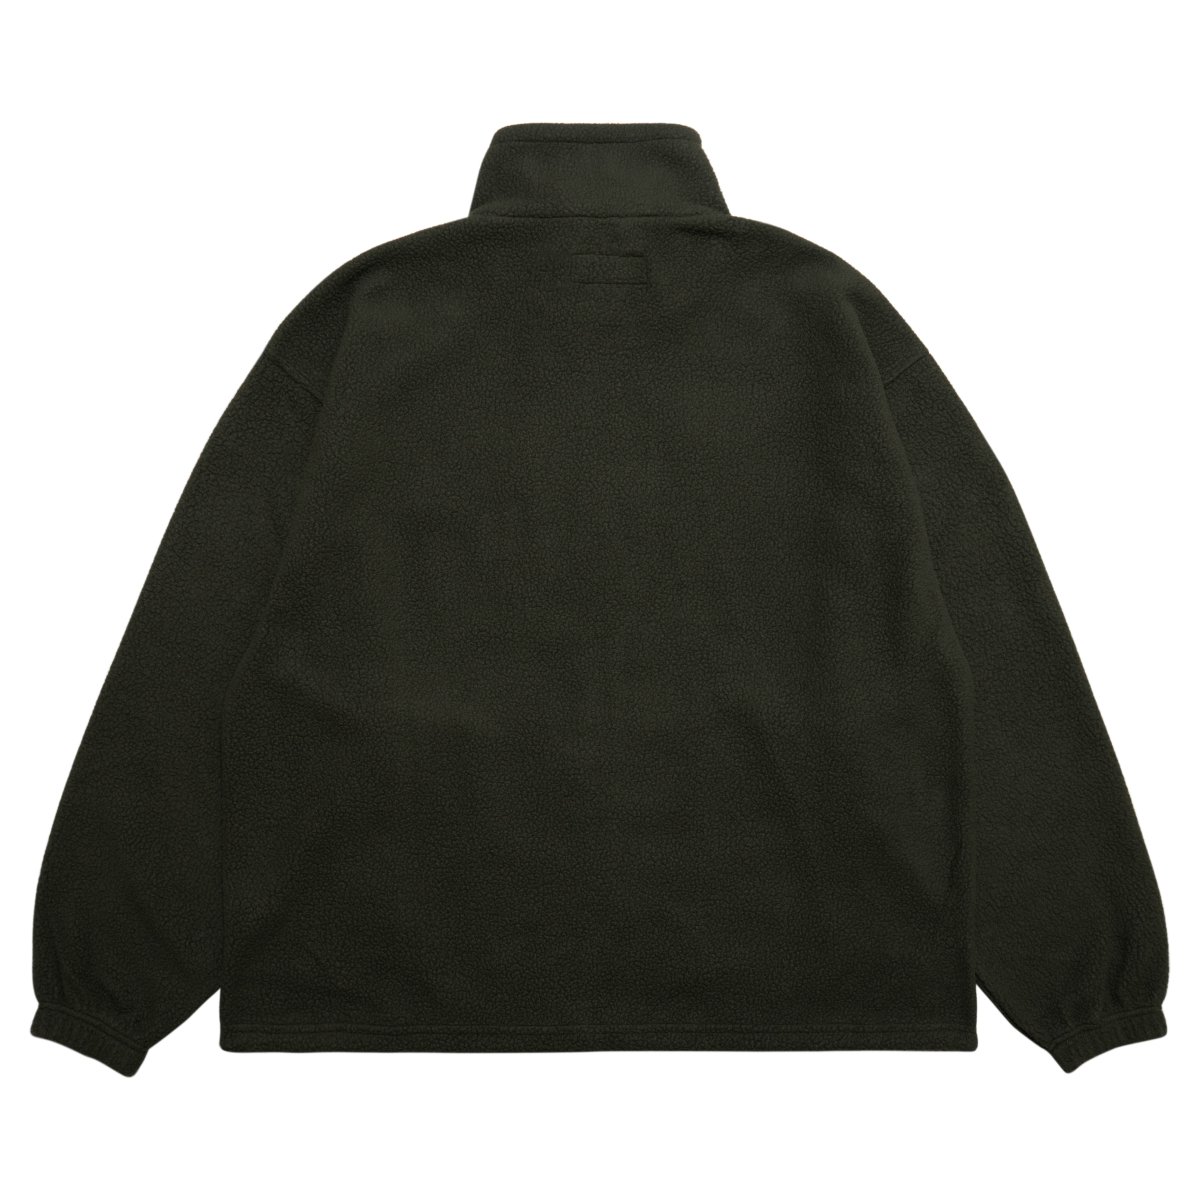 [SALE] Fleece Jacket - Olive - CUP AND CONE